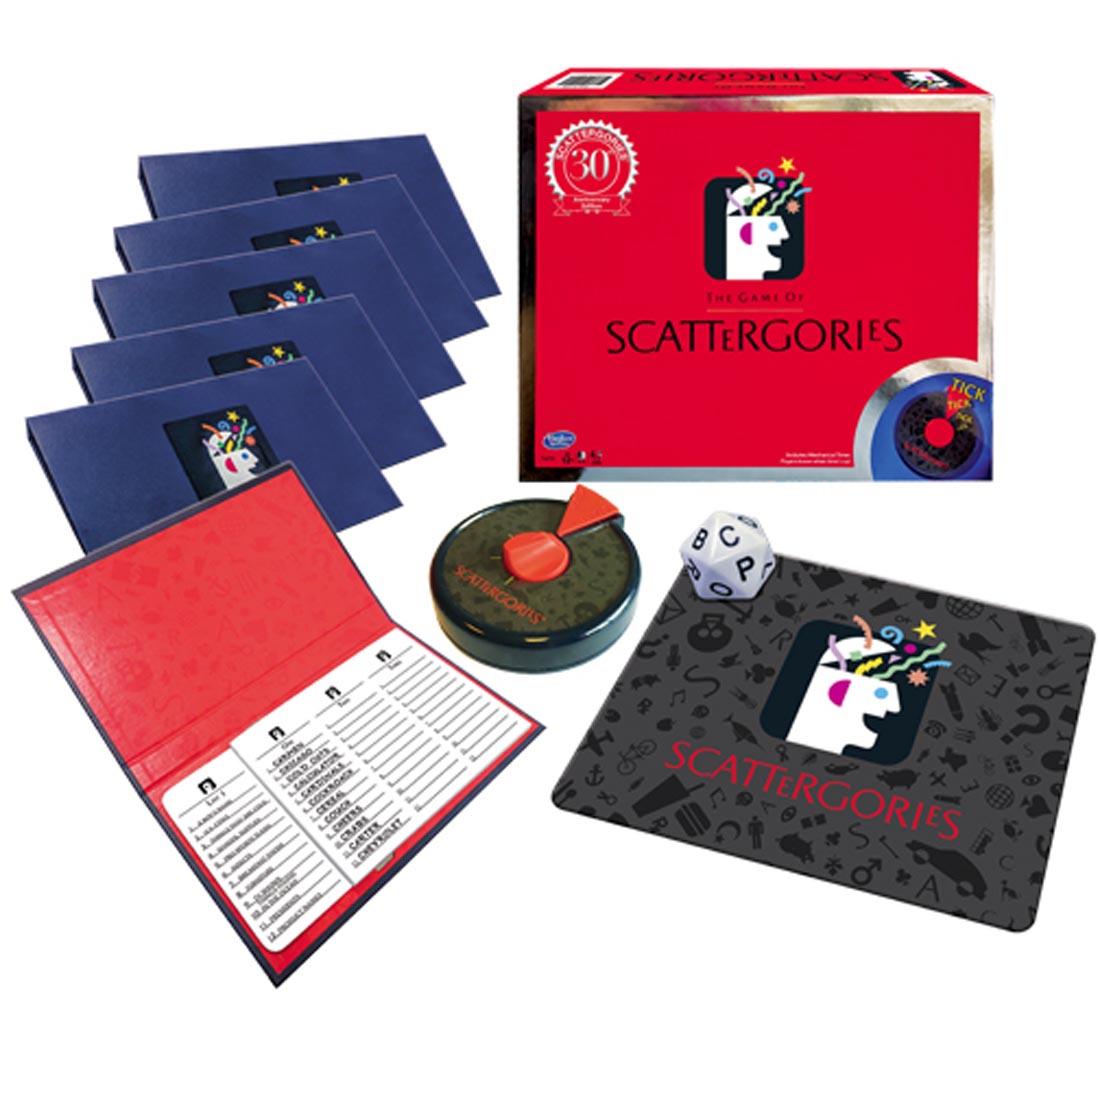 Scattergories 30th Anniversary Edition Game, showing box and contents